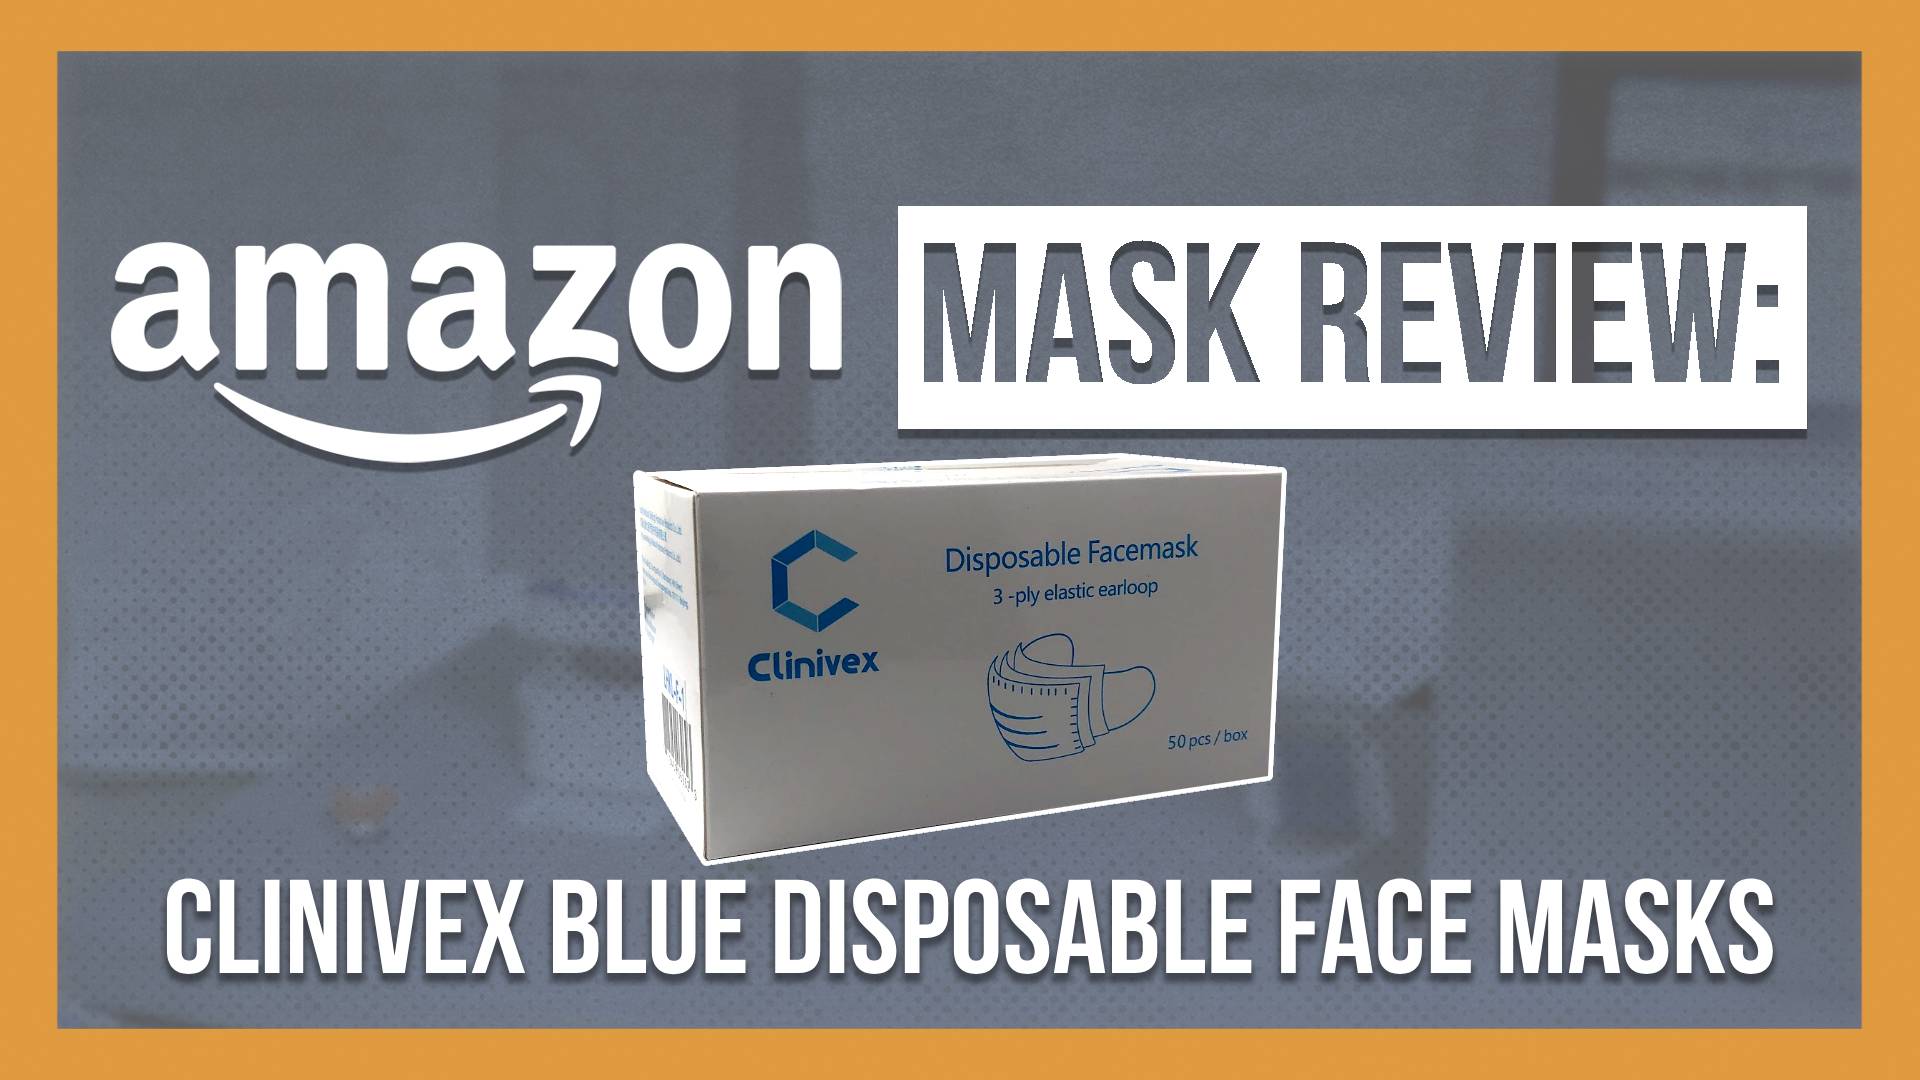 Clinivex Blue 3ply Disposable Face Masks